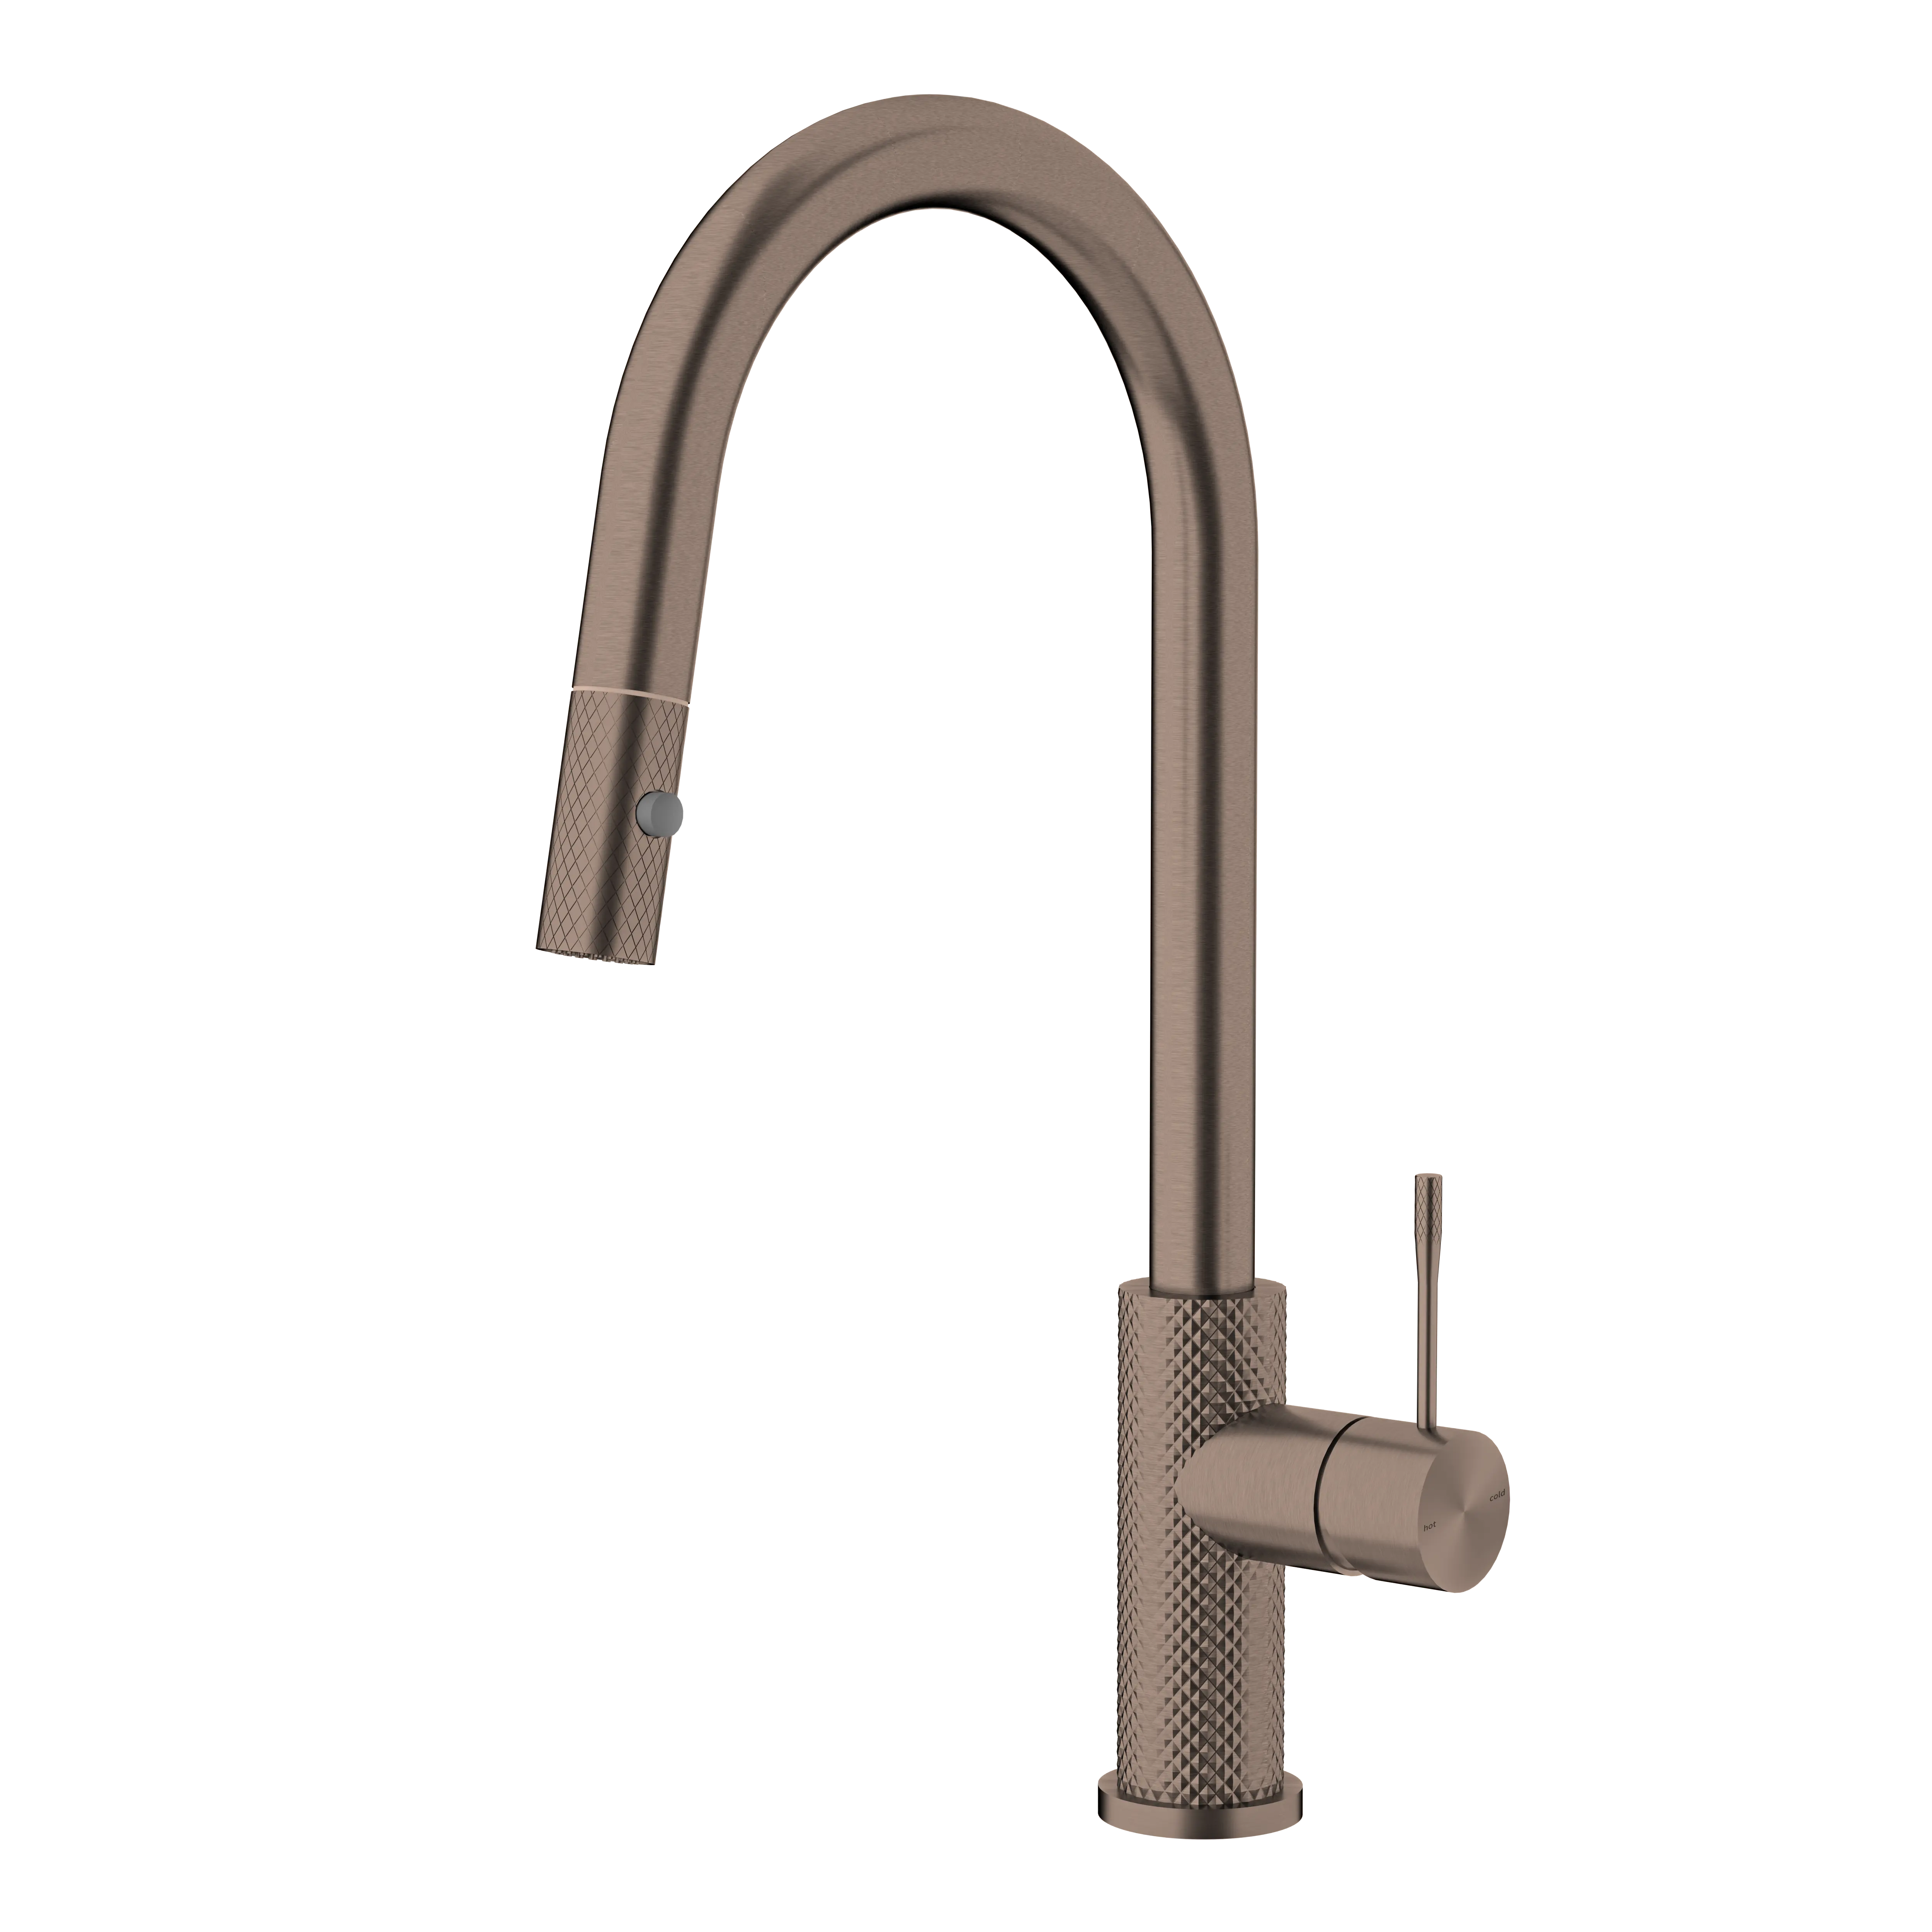 2022 robinet cuisine douchette 360-degree Brushed Bronze Color knurled lead-free brass kitchen faucet with pull down sprayer